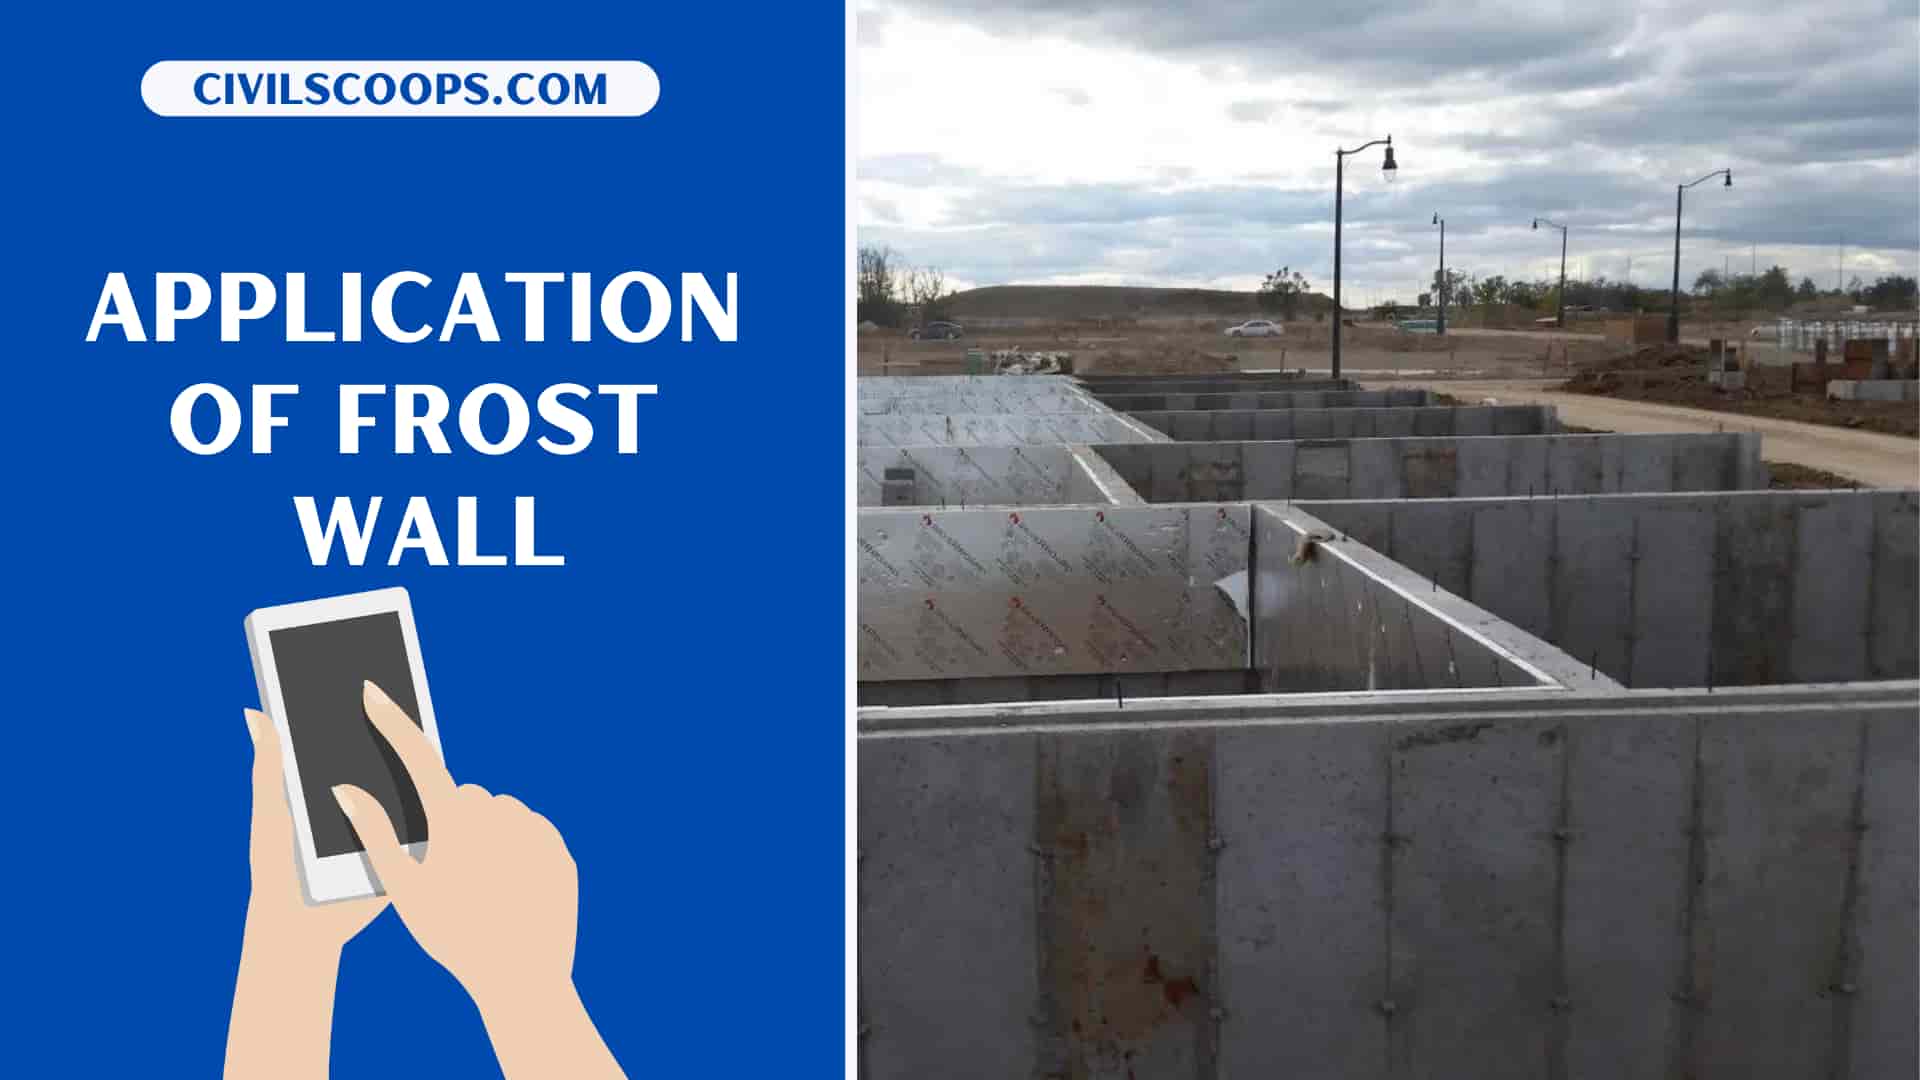 Application of Frost Wall